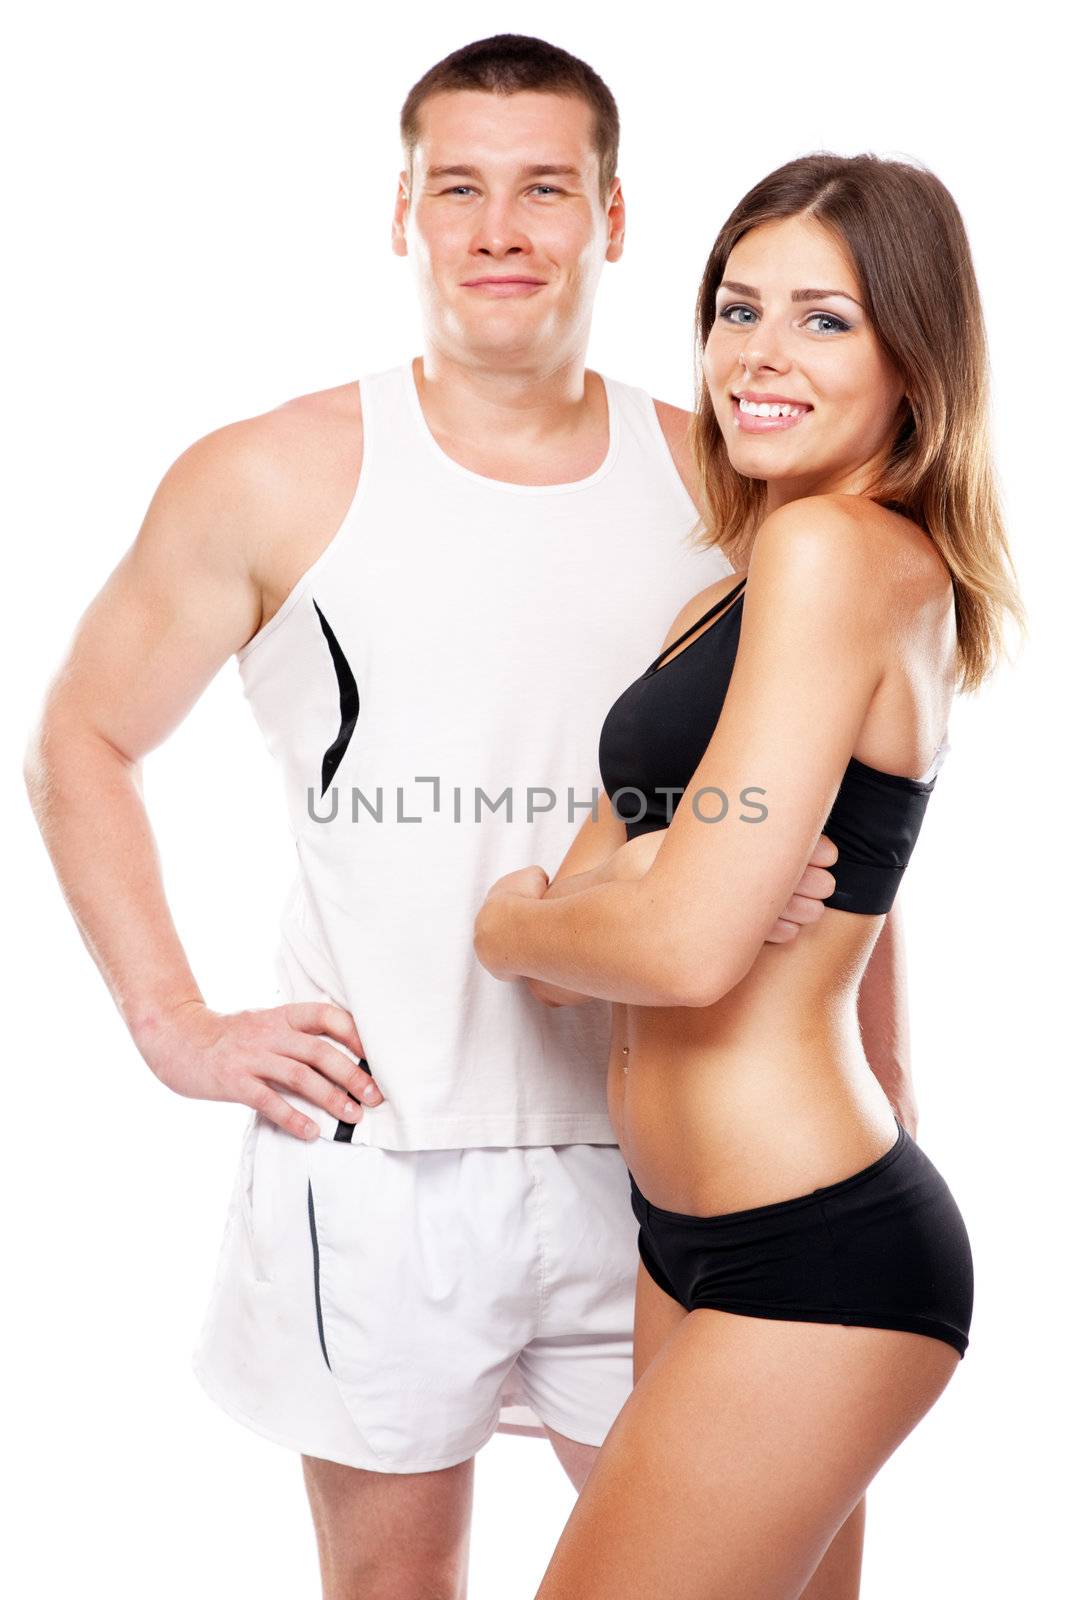 Beautiful healthy-looking young couple in sports outfit